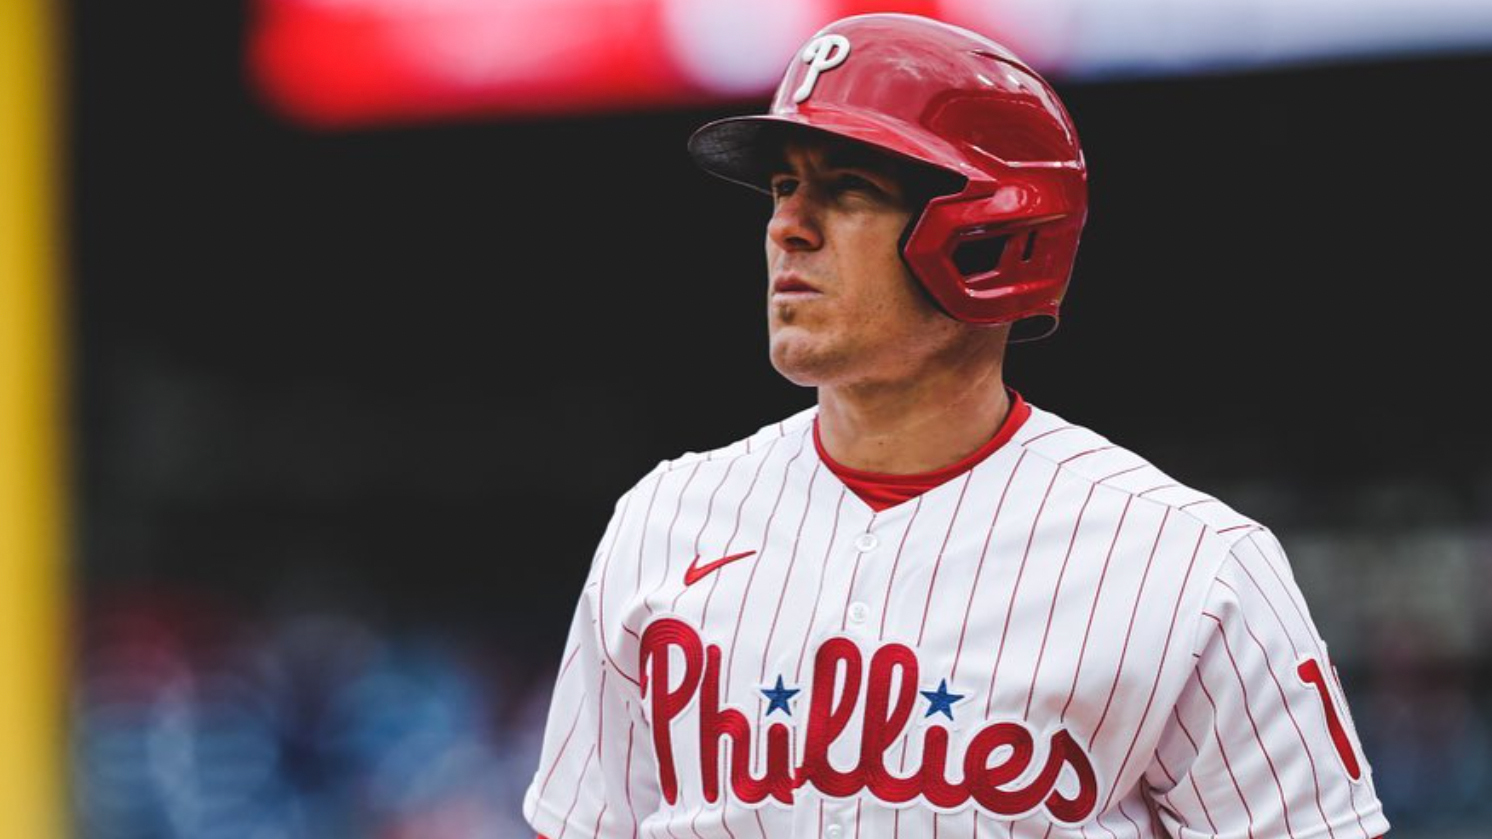 Phillies catcher J.T. Realmuto open to using DH to keep him fresh